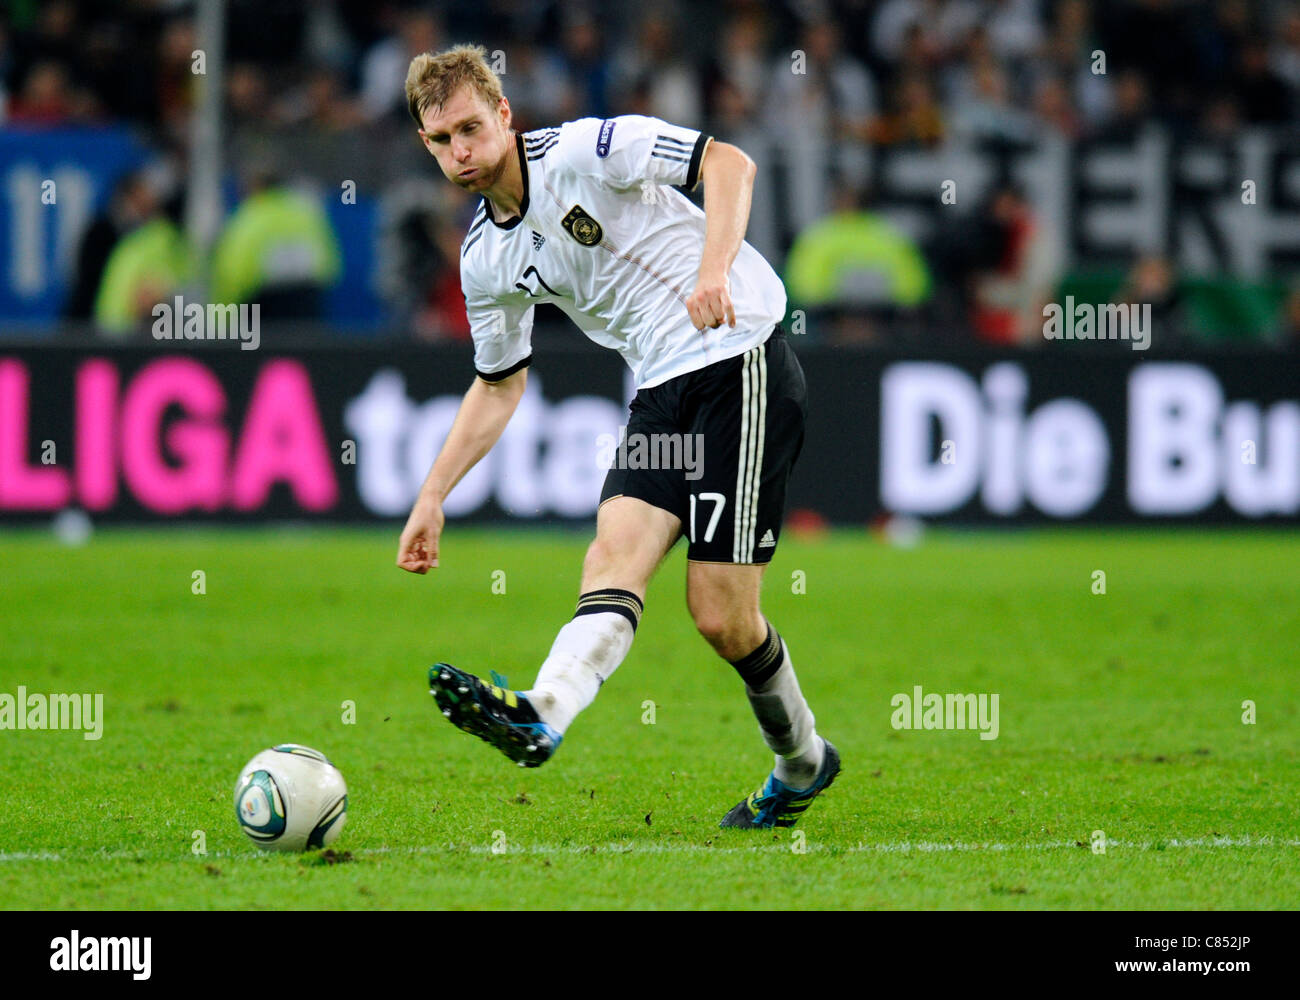 Qualification match for the European Football Championship in Poland and Ukraine 2012; Germany vs Belgium 3:1, at the Esprit Arena in Duesseldorf, Germany: Per Mertesacker (Germany, Arsenal London) . Stock Photo